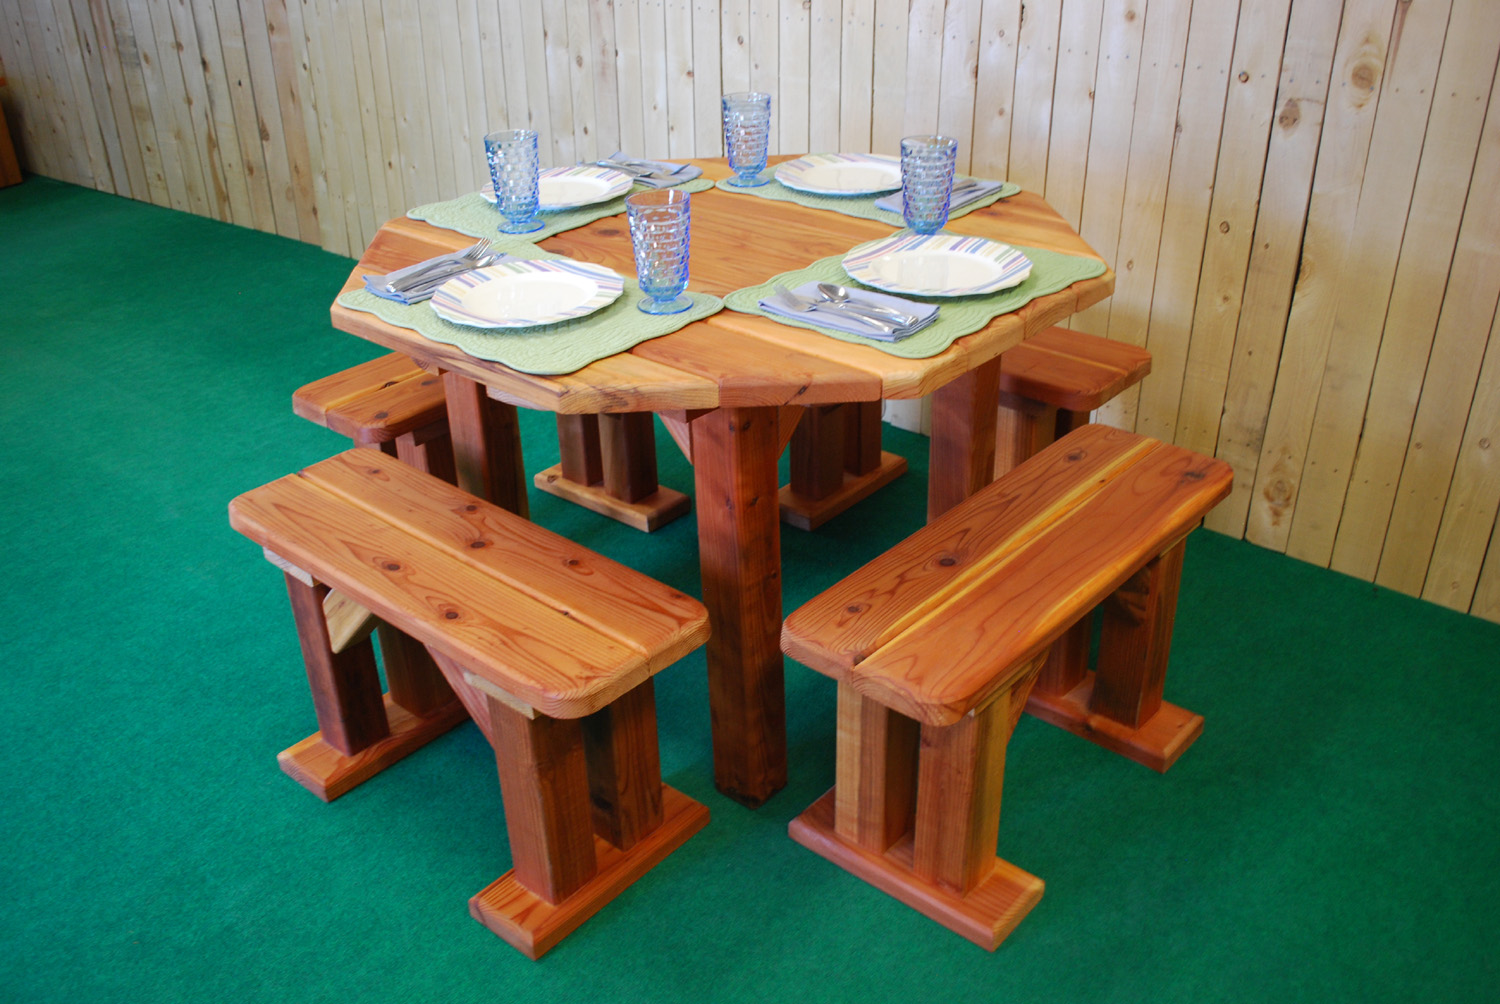 48" redwood octagon picnic table